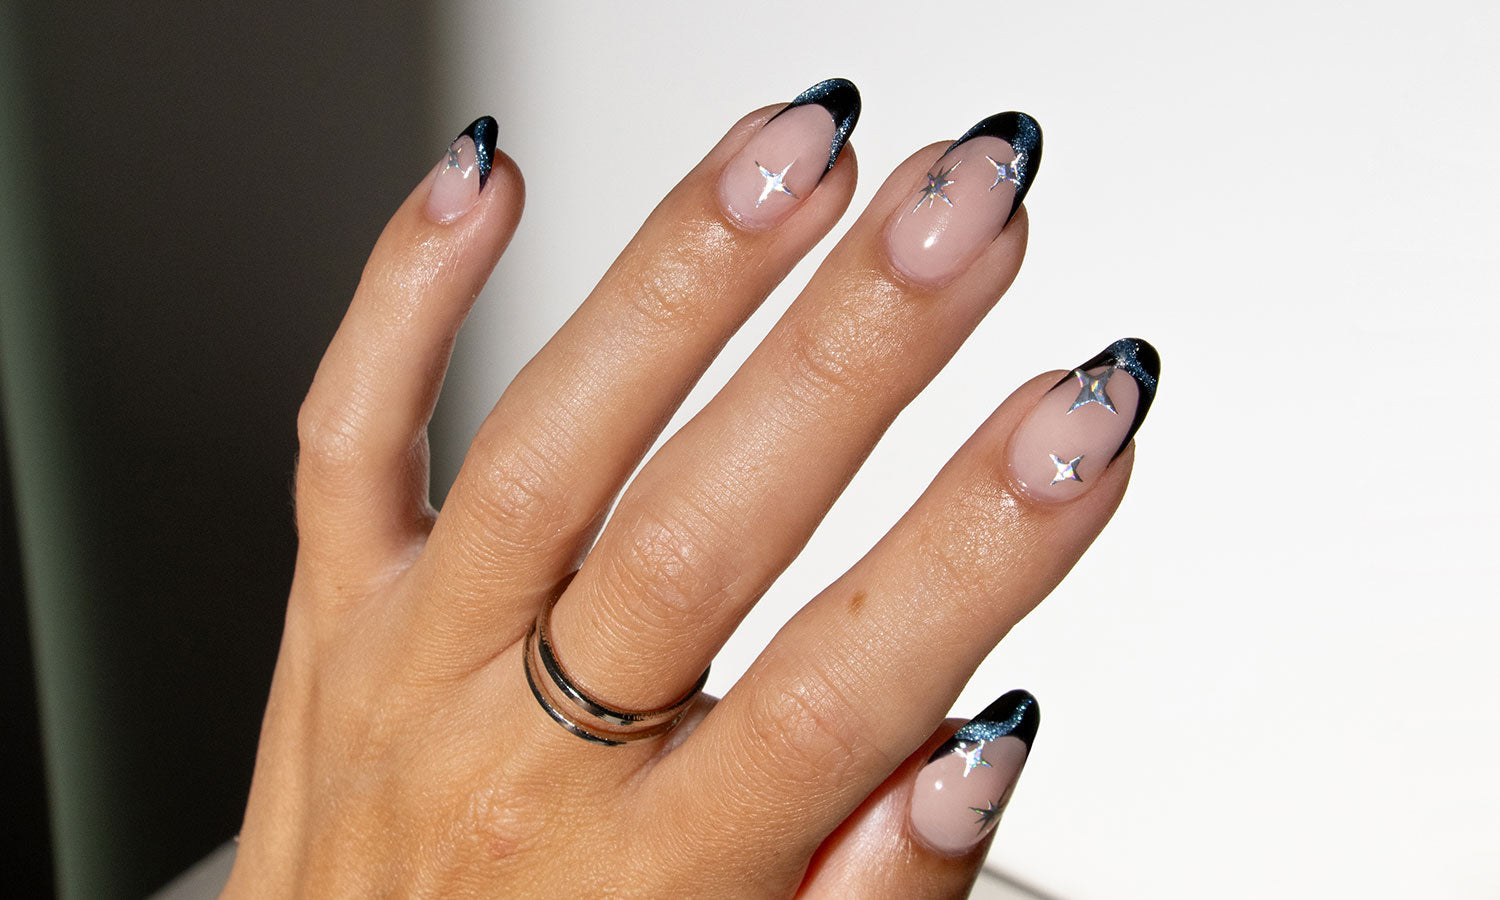 Gelous Taylor Swift Midnights-inspired gel nail art - photographed in New Zealand on model